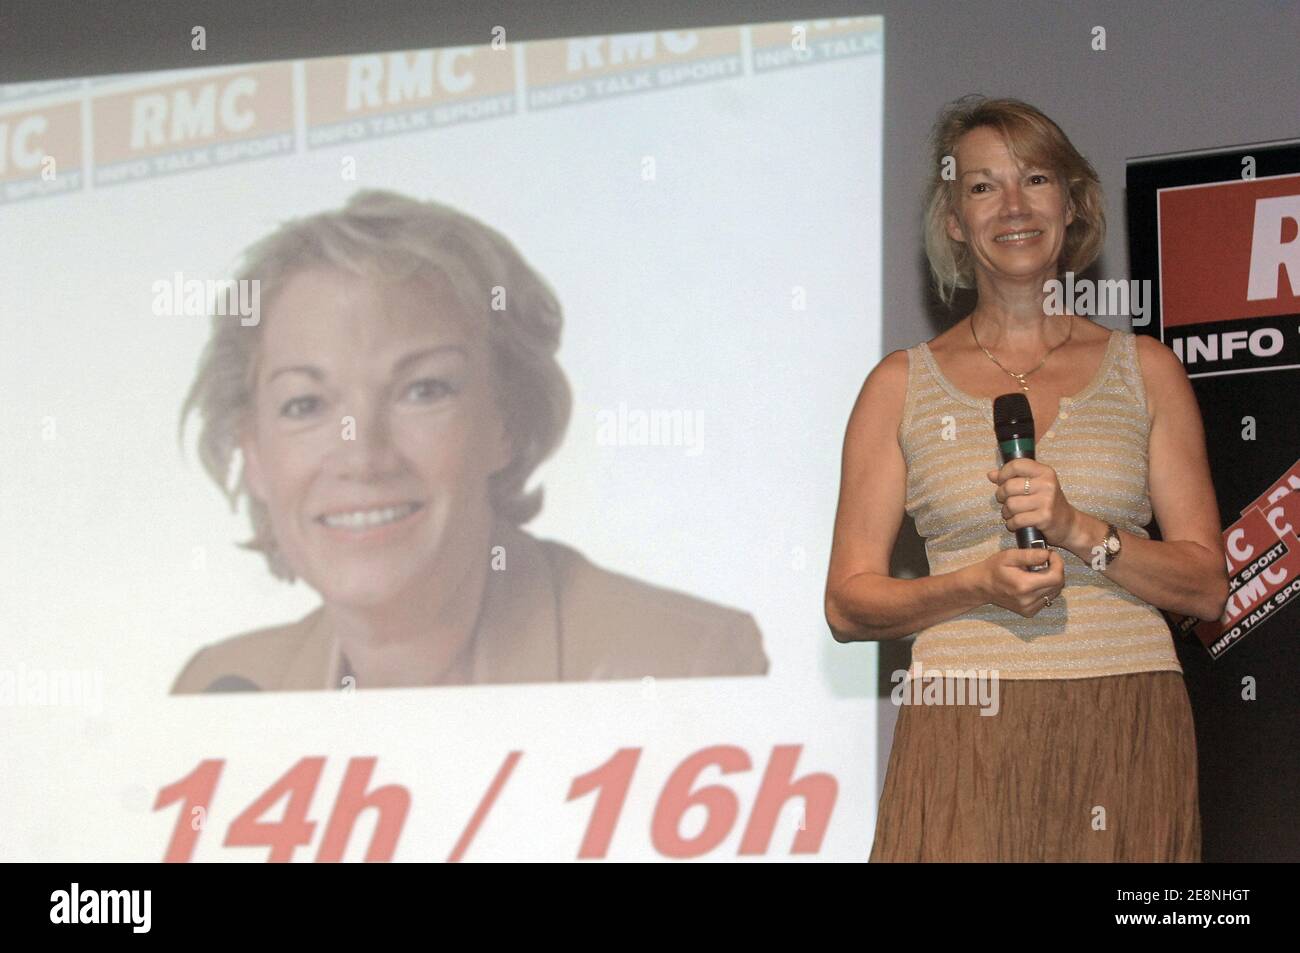 Radio presenter Brigitte Lahaie attends the annual press conference of  French Radio RMC held in Paris, France on August 29, 2007. Photo by  Giancarlo Gorassini/ABACAPRESS.COM Stock Photo - Alamy